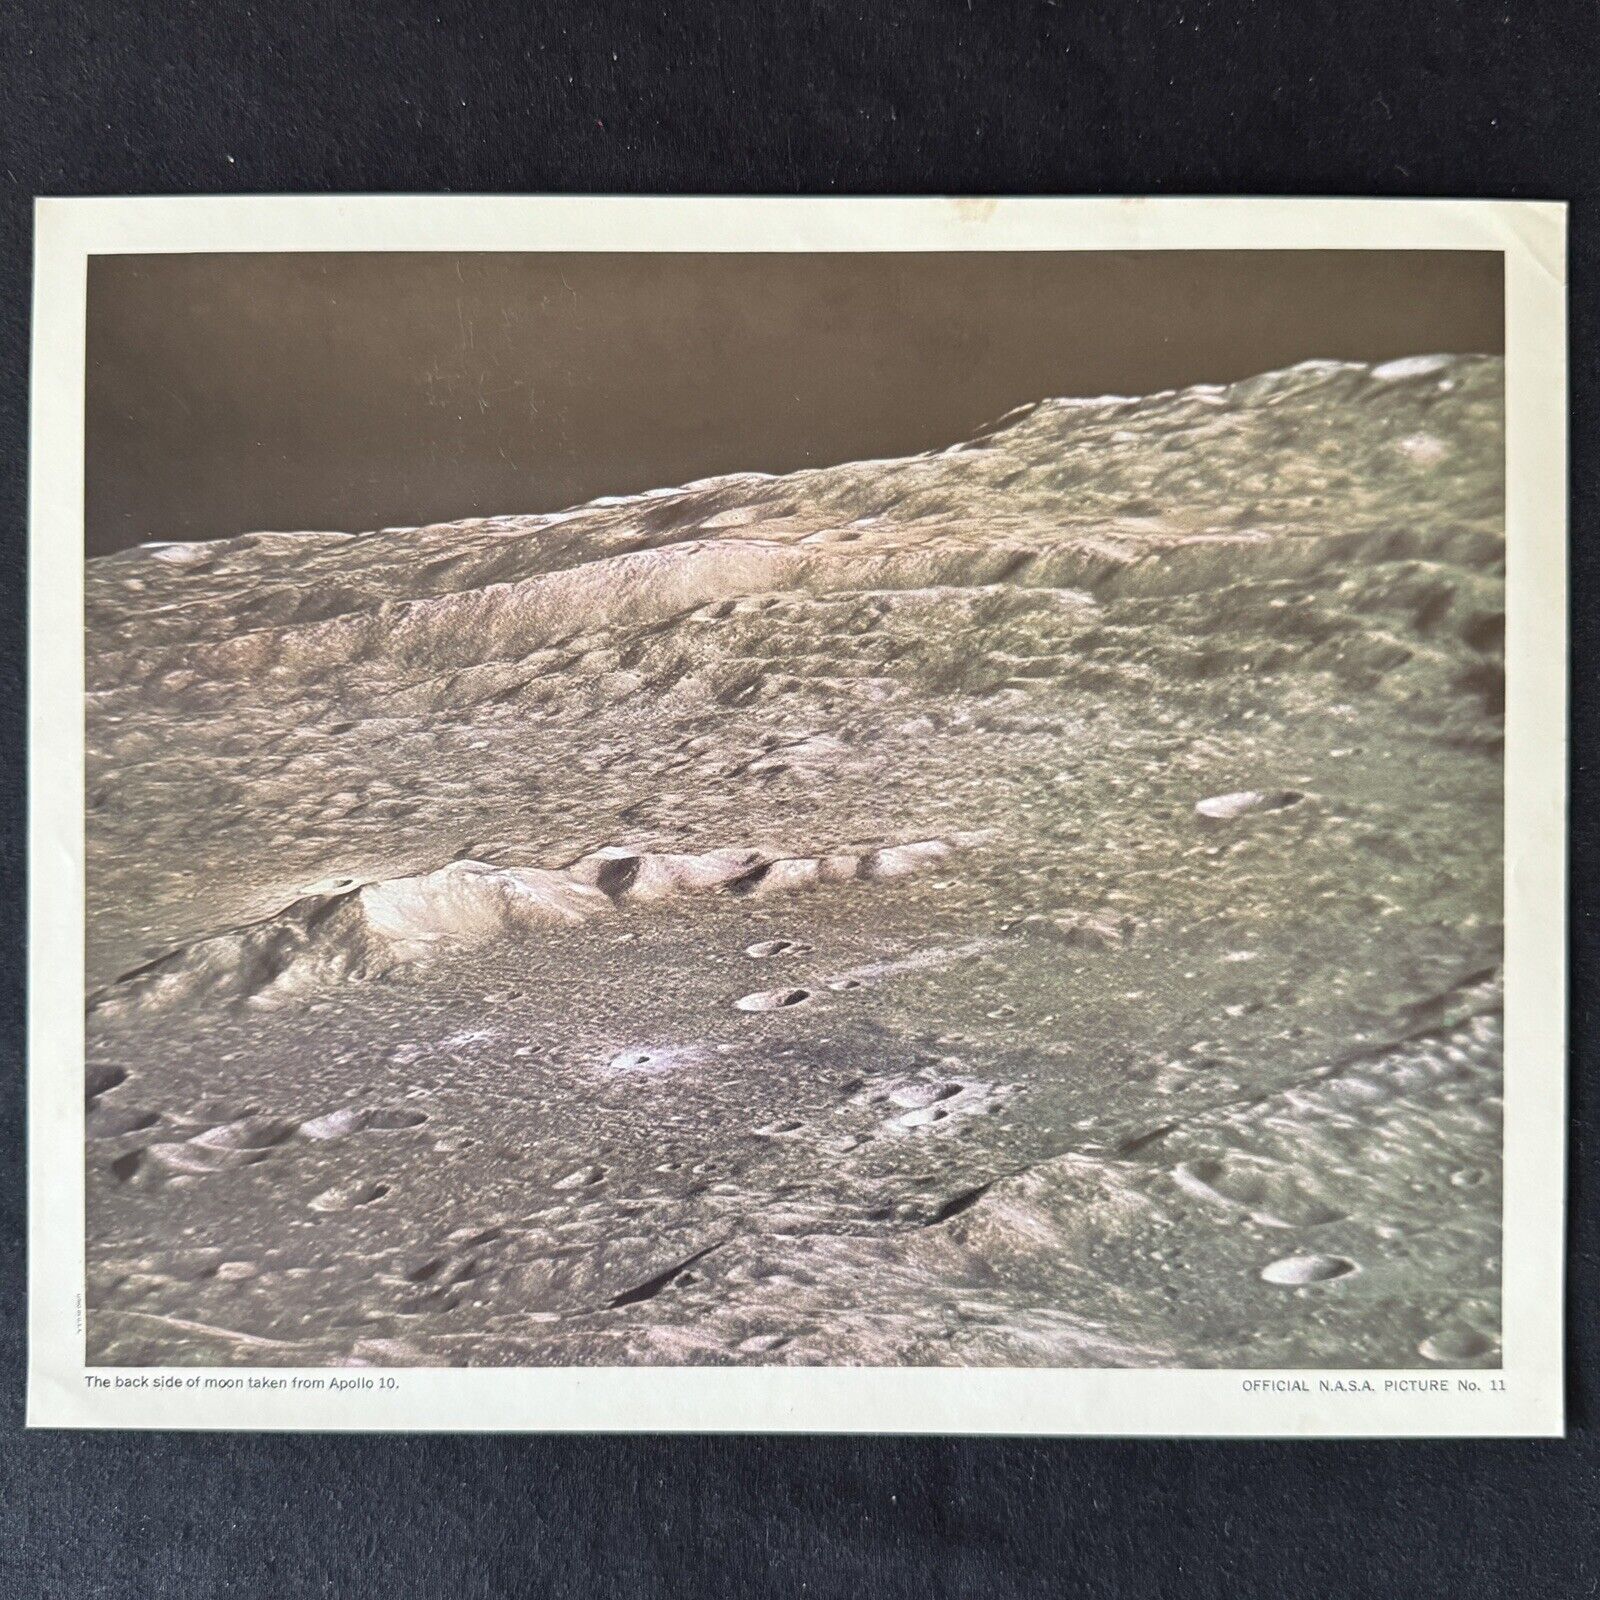 Rare Vintage Official NASA Picture  #11 Back side of the moon taken by Apollo 10